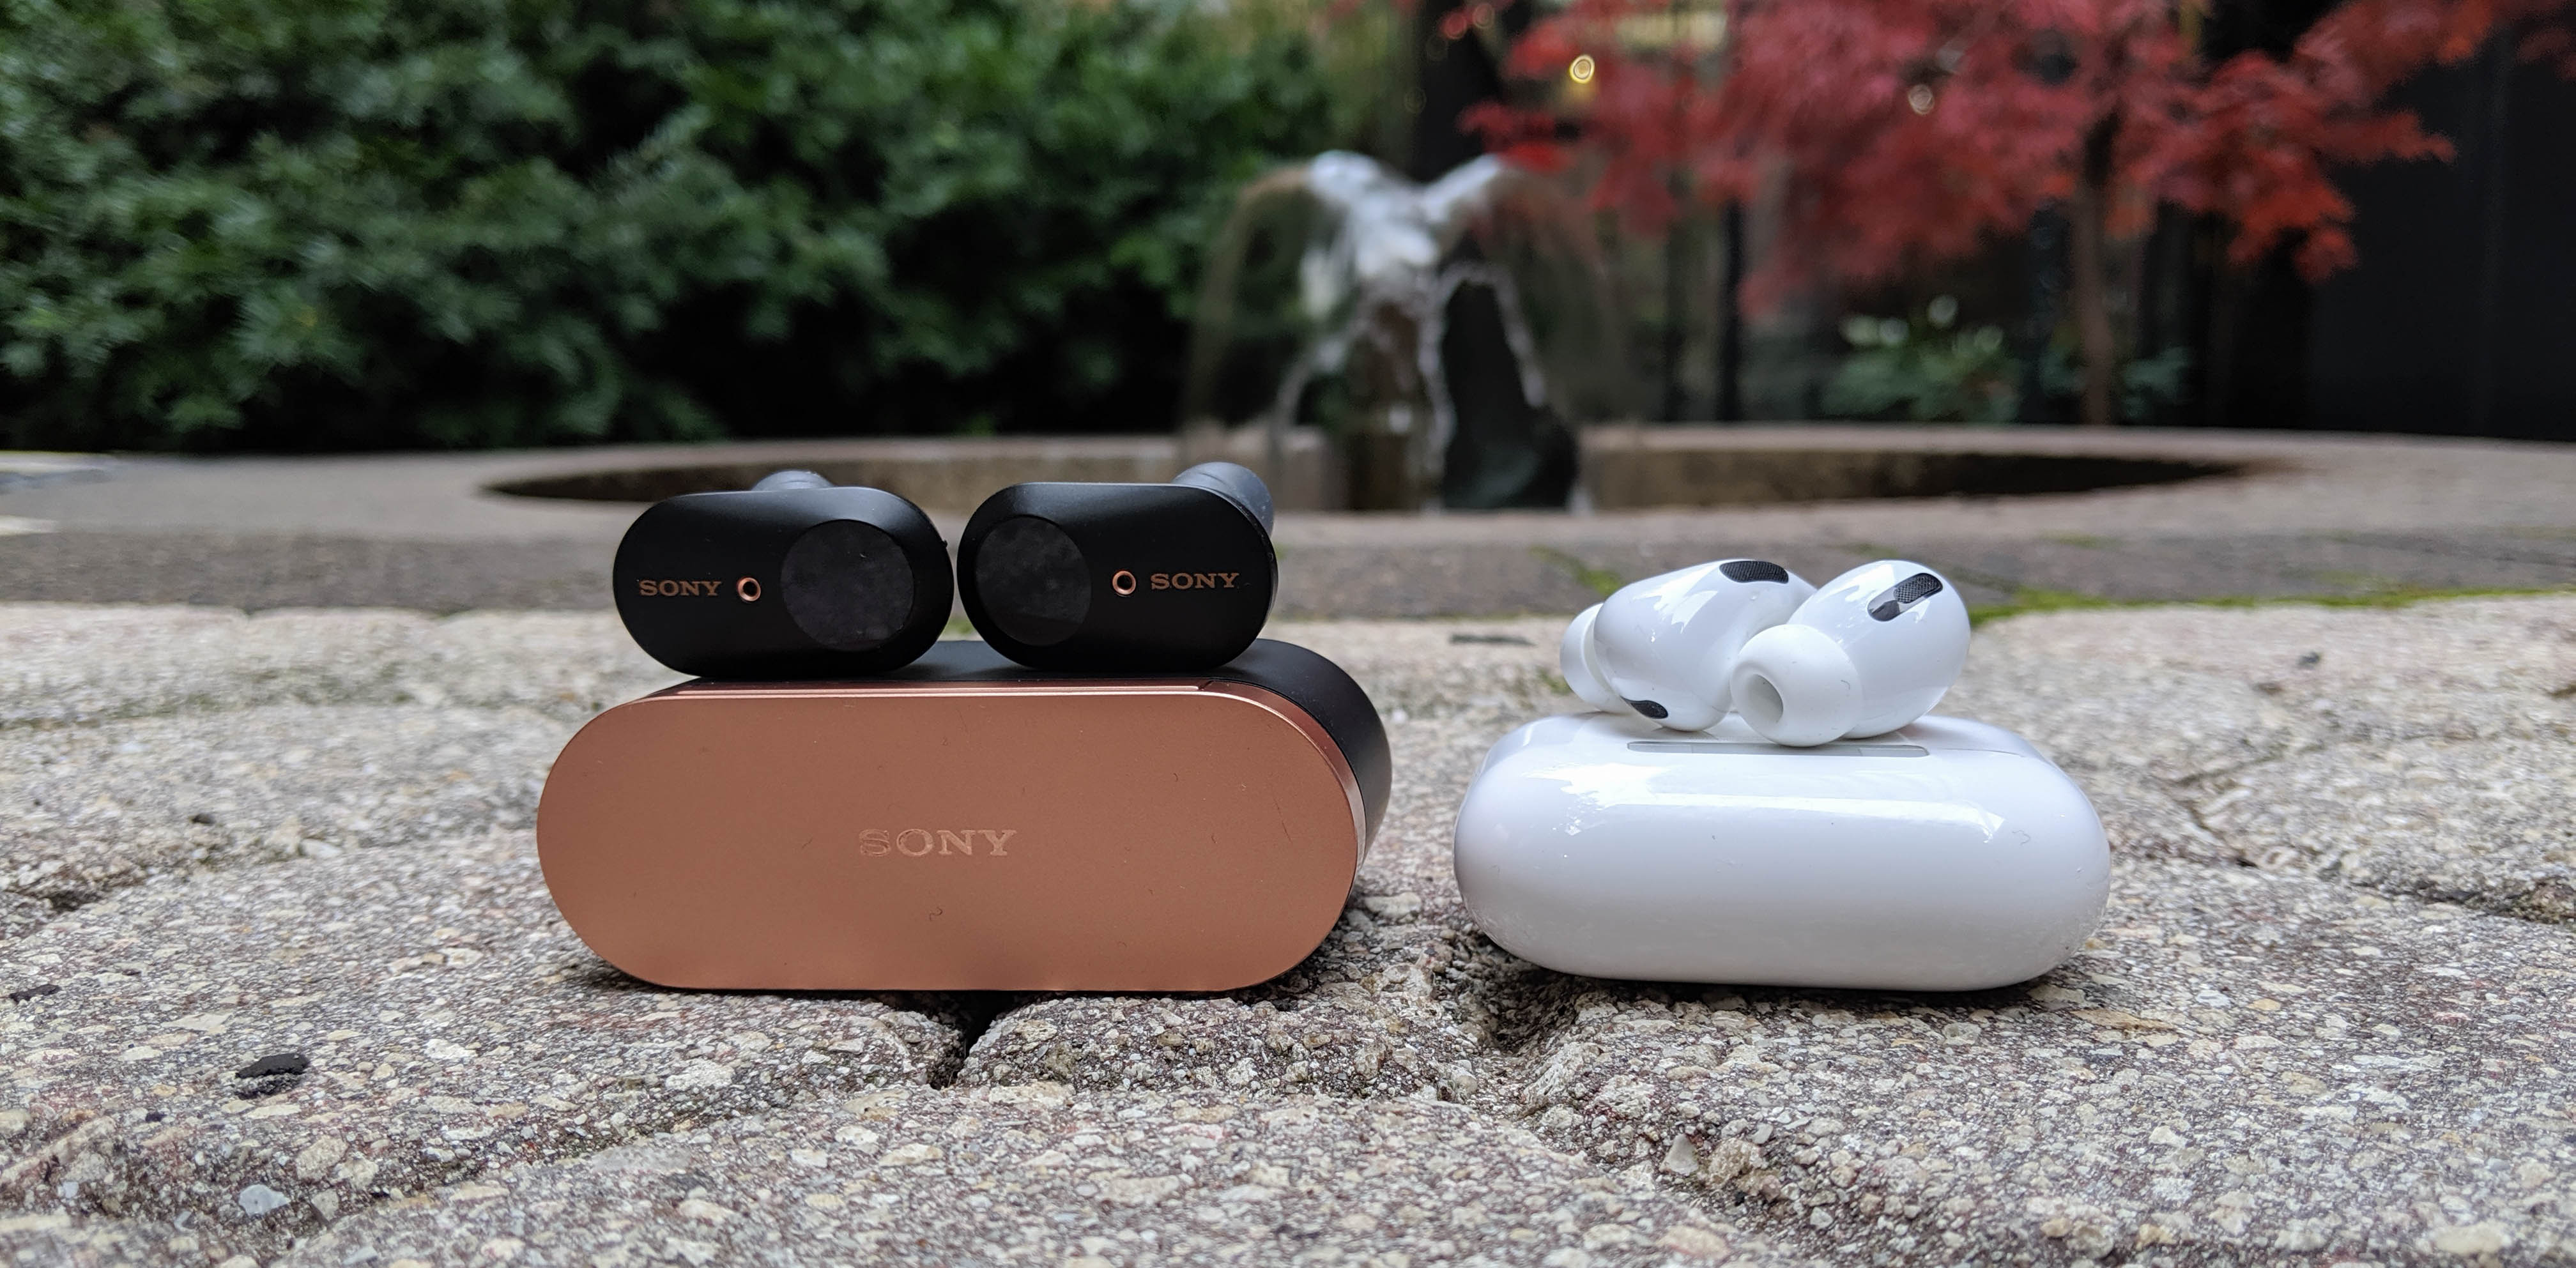 Apple AirPods Pro vs. Sony WF-1000XM3: Which wireless noise